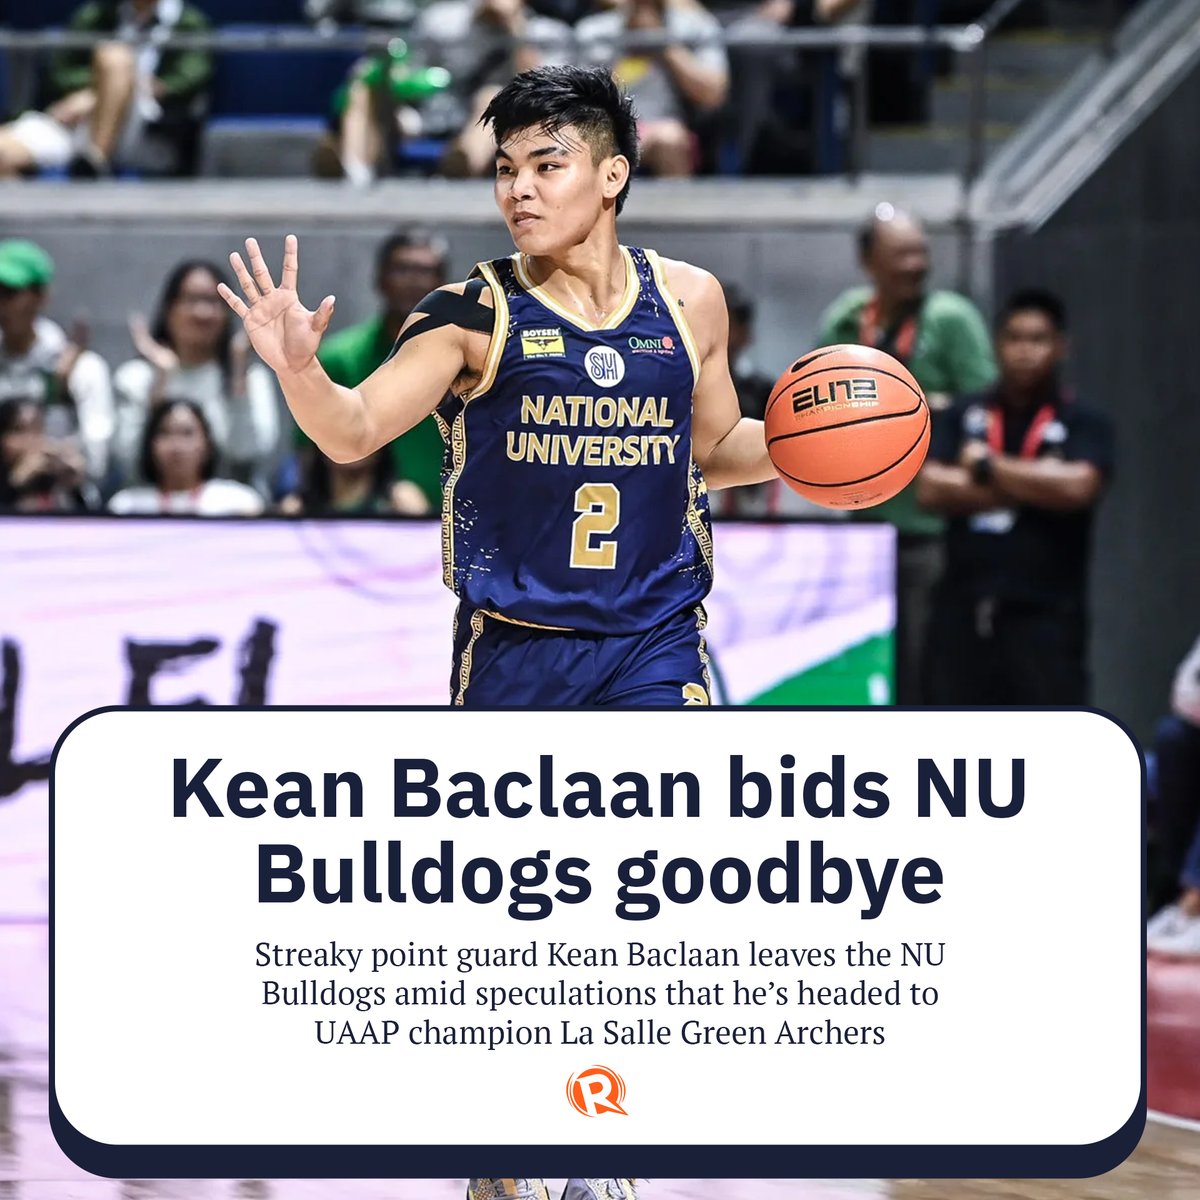 Baclaan is set to play for his third collegiate team since 2022, playing momentarily with the UST Growling Tigers during the men’s basketball offseason before transferring to National University. trib.al/InW4qq8